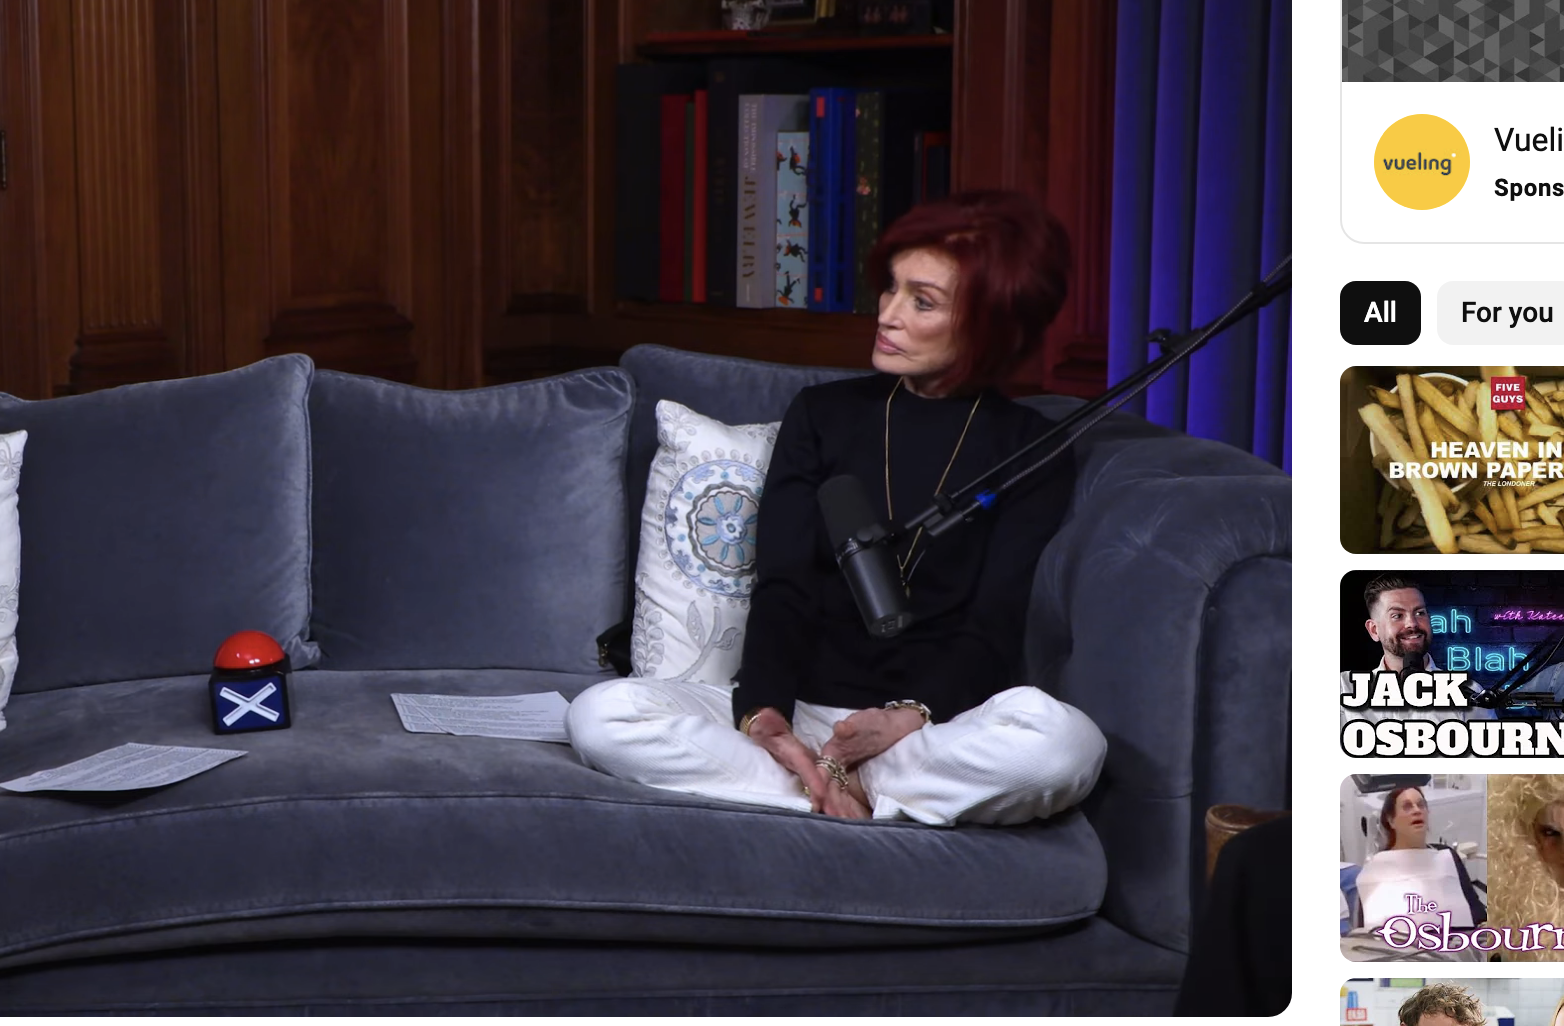 Two people sitting on a couch during an interview, with one wearing a black shirt and the other a white hoodie